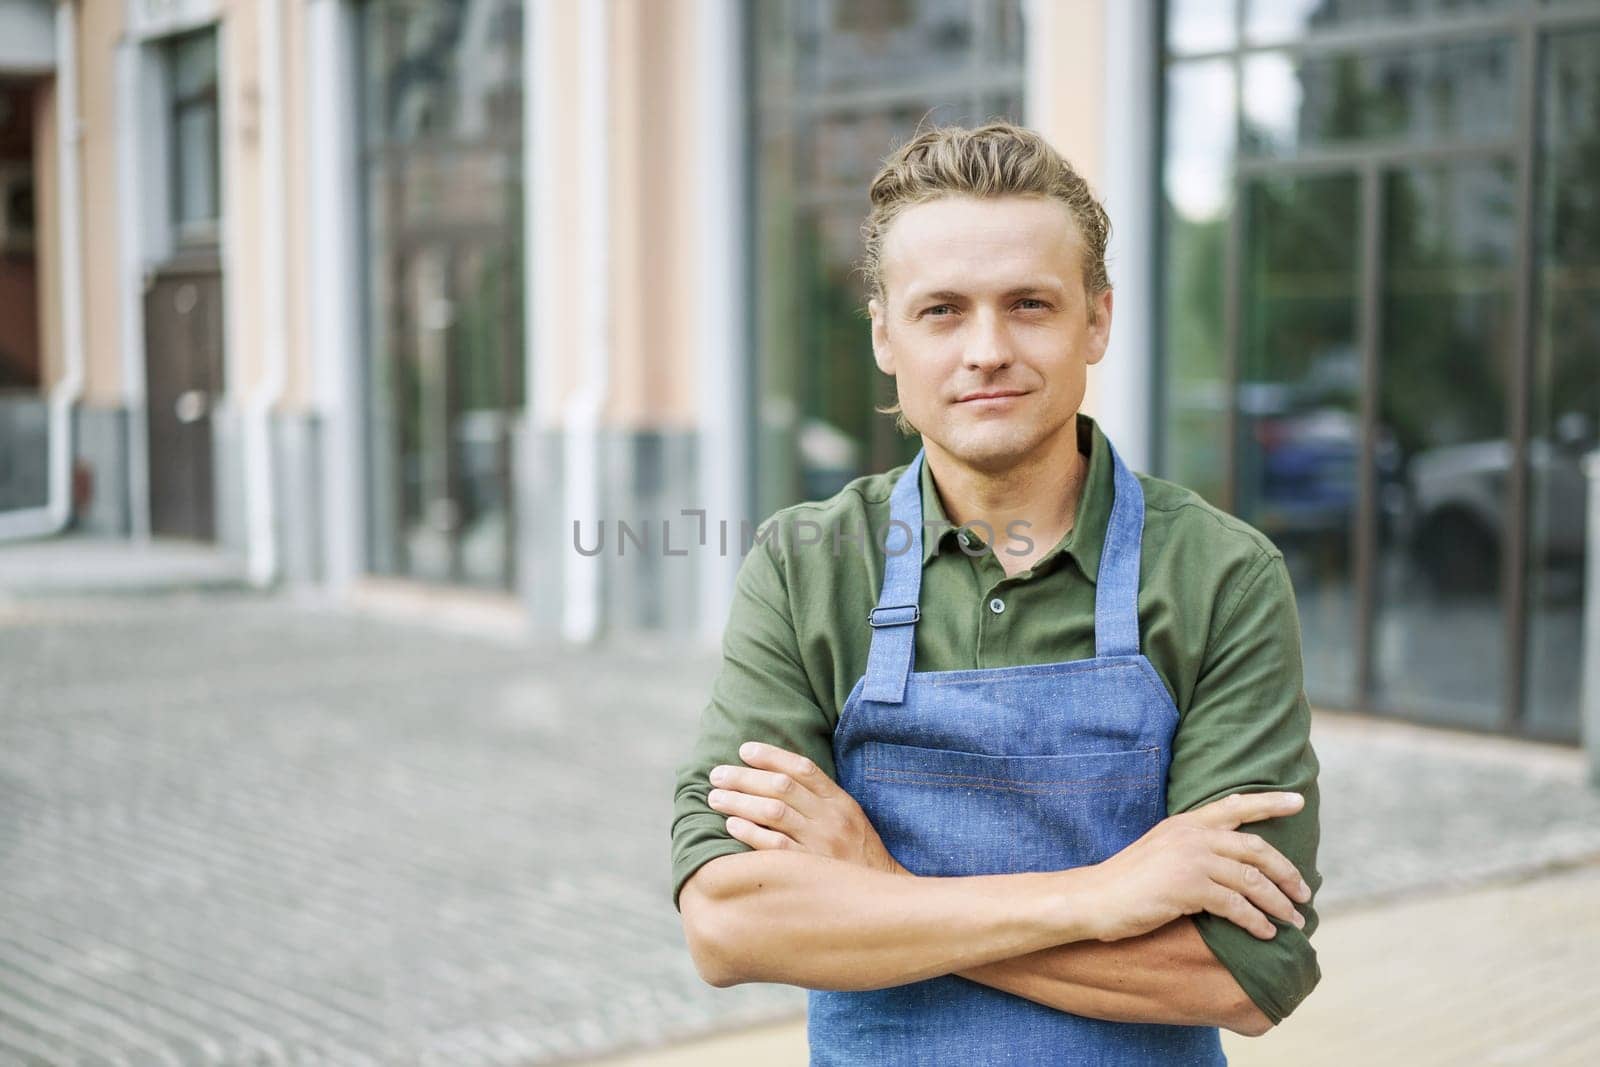 Restaurant or kitchen worker wearing blue apron, standing against backdrop of city. Concept of service and readiness to help. Customer service-oriented nature of the hospitality industry. . High quality photo